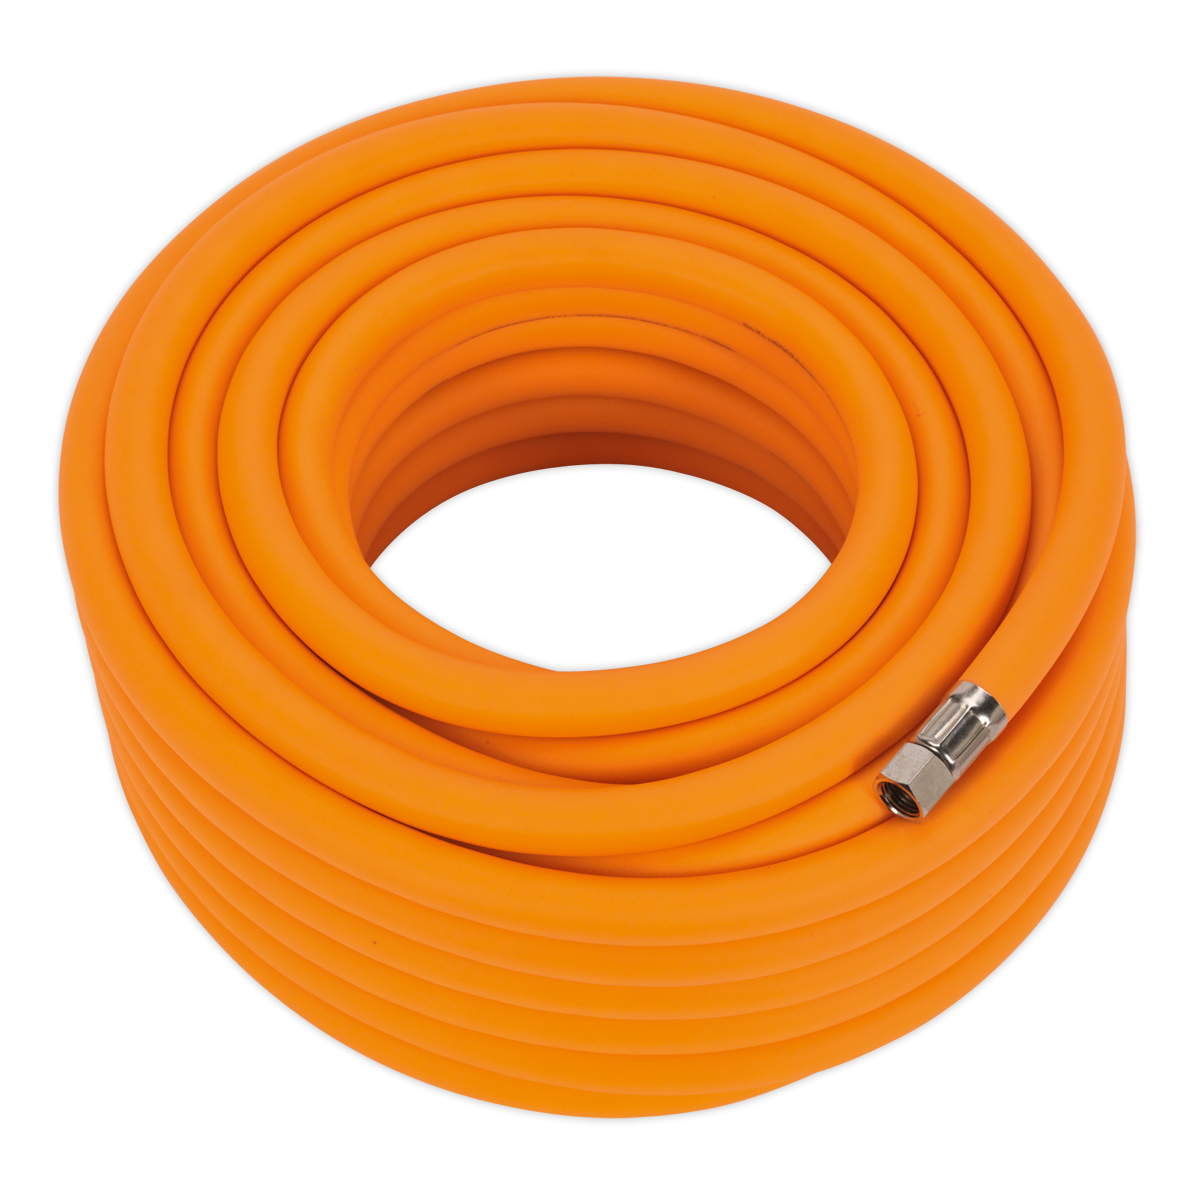 Sealey Air Hose 20m x Ø10mm Hybrid High-Visibility with 1/4"BSP Unions